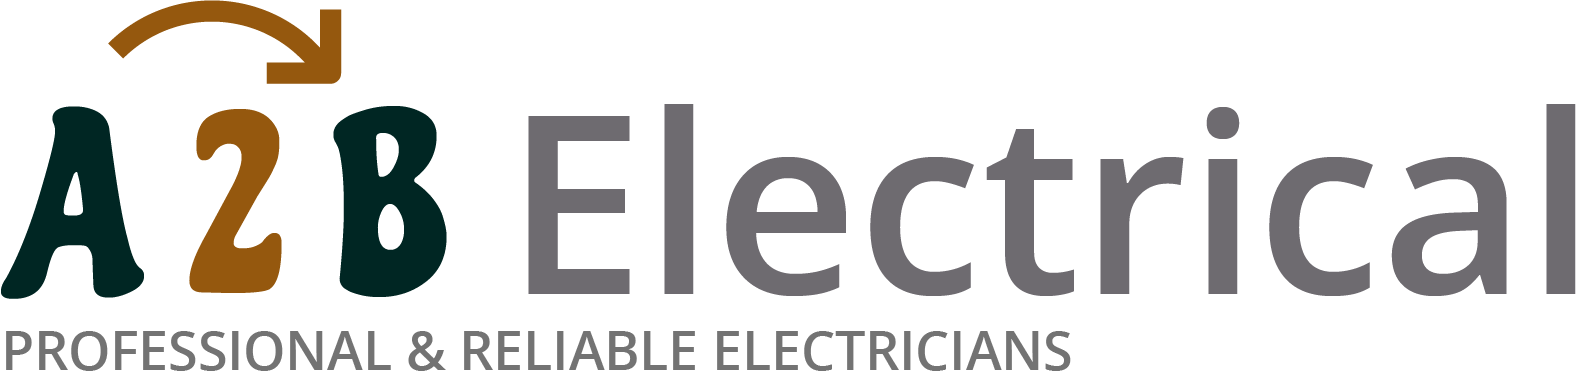 If you have electrical wiring problems in Thorpe, we can provide an electrician to have a look for you. 